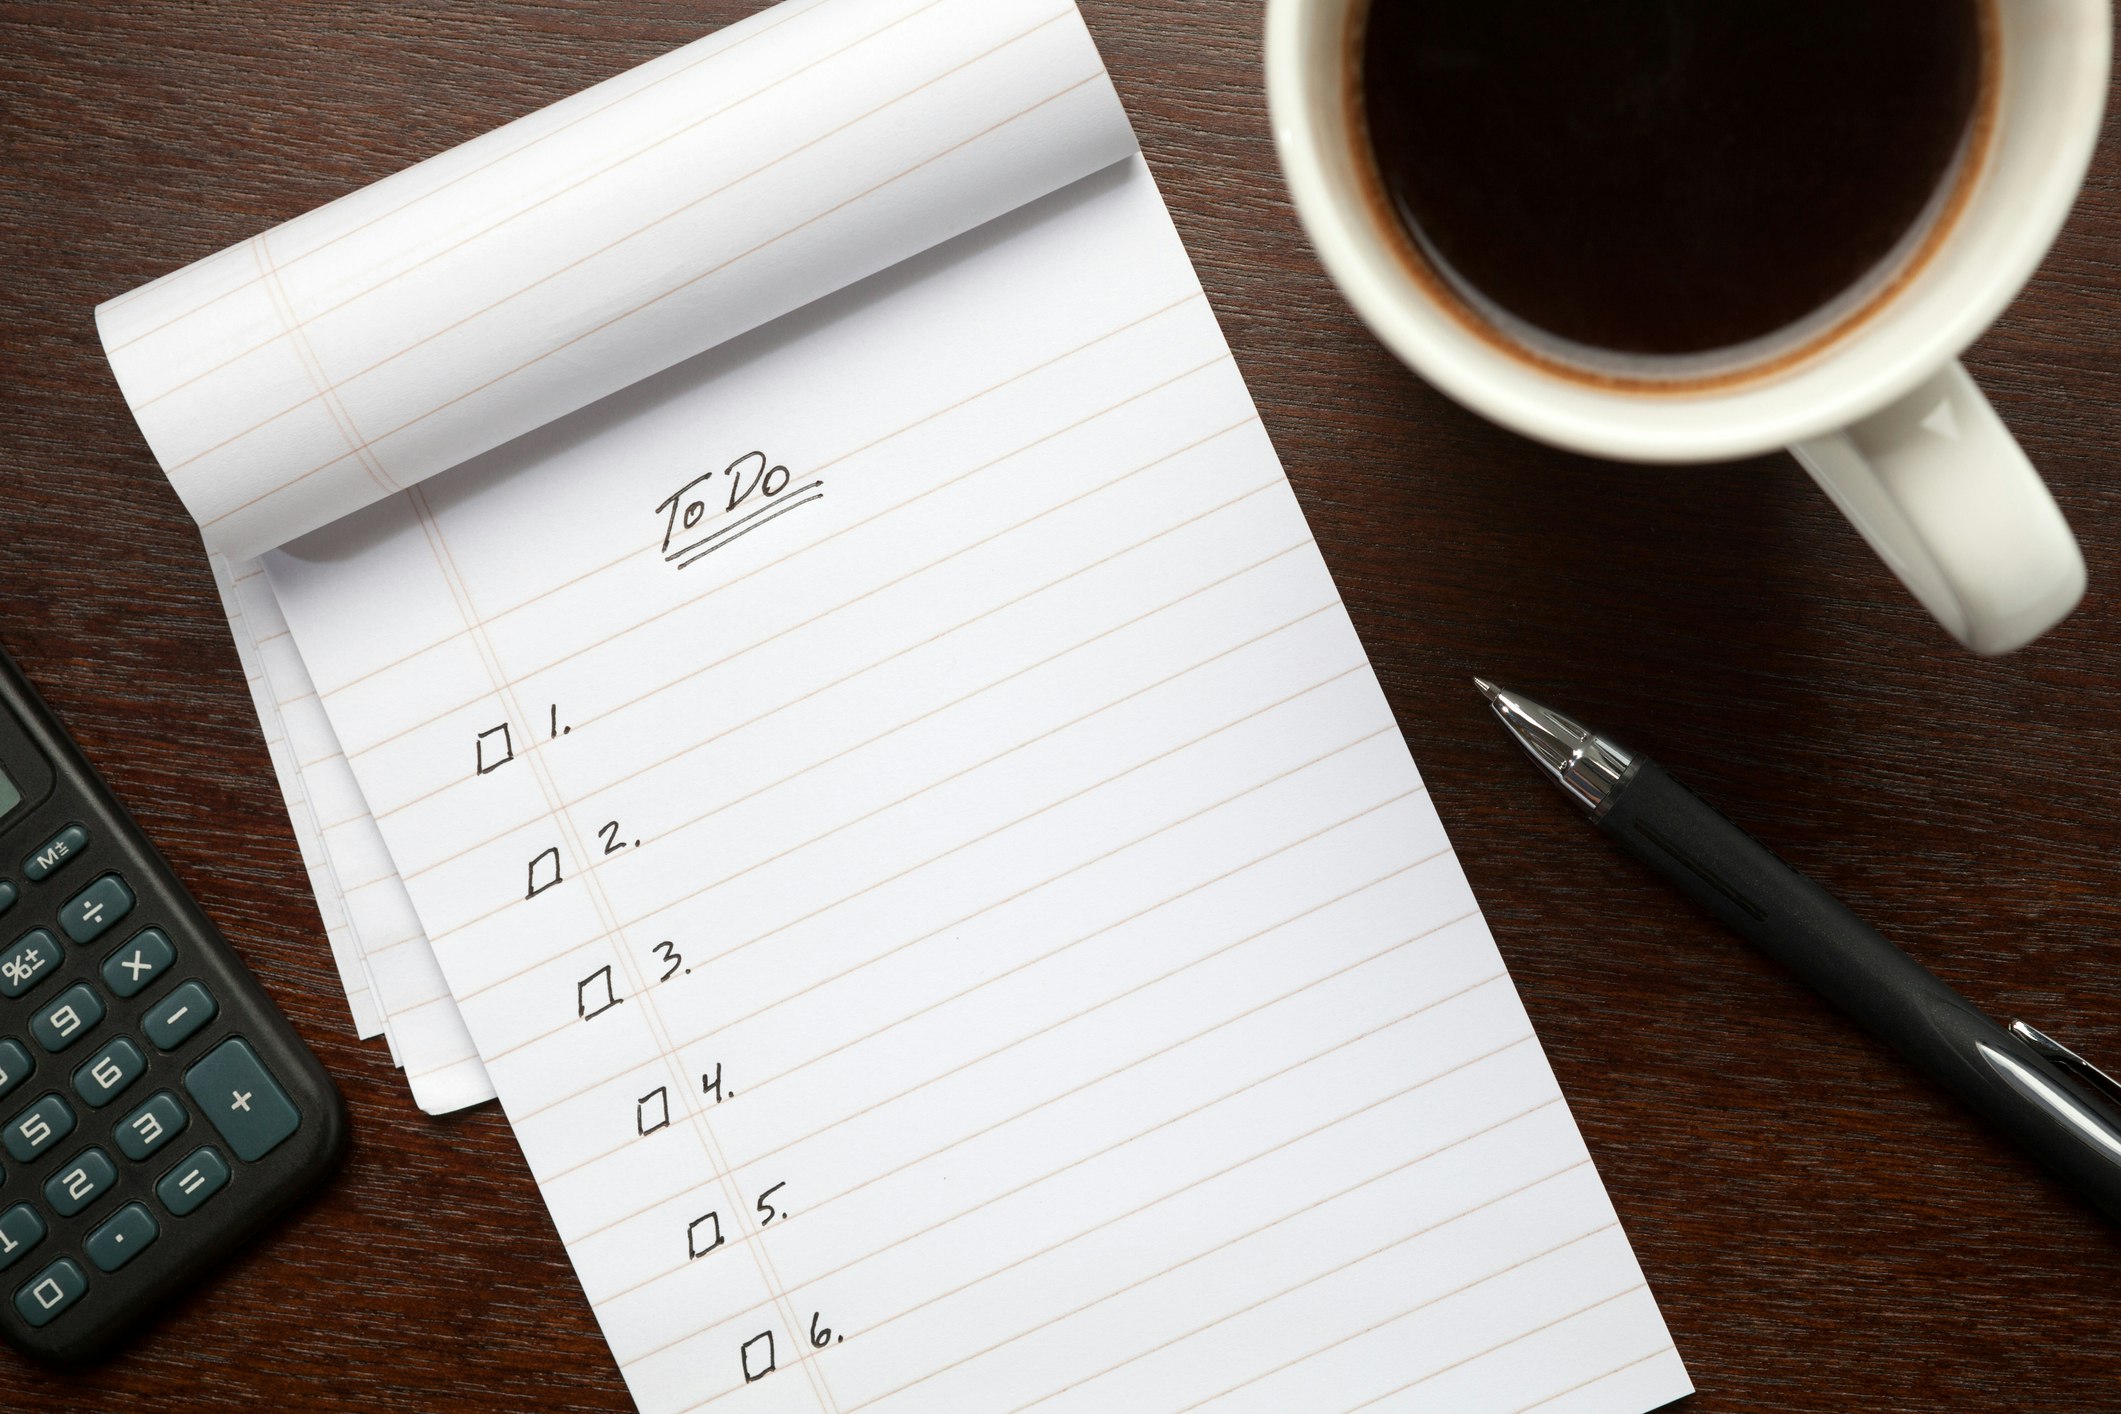 Getty image of a to do list, a cup of coffee and a pen. You can also see a calculator to the side.